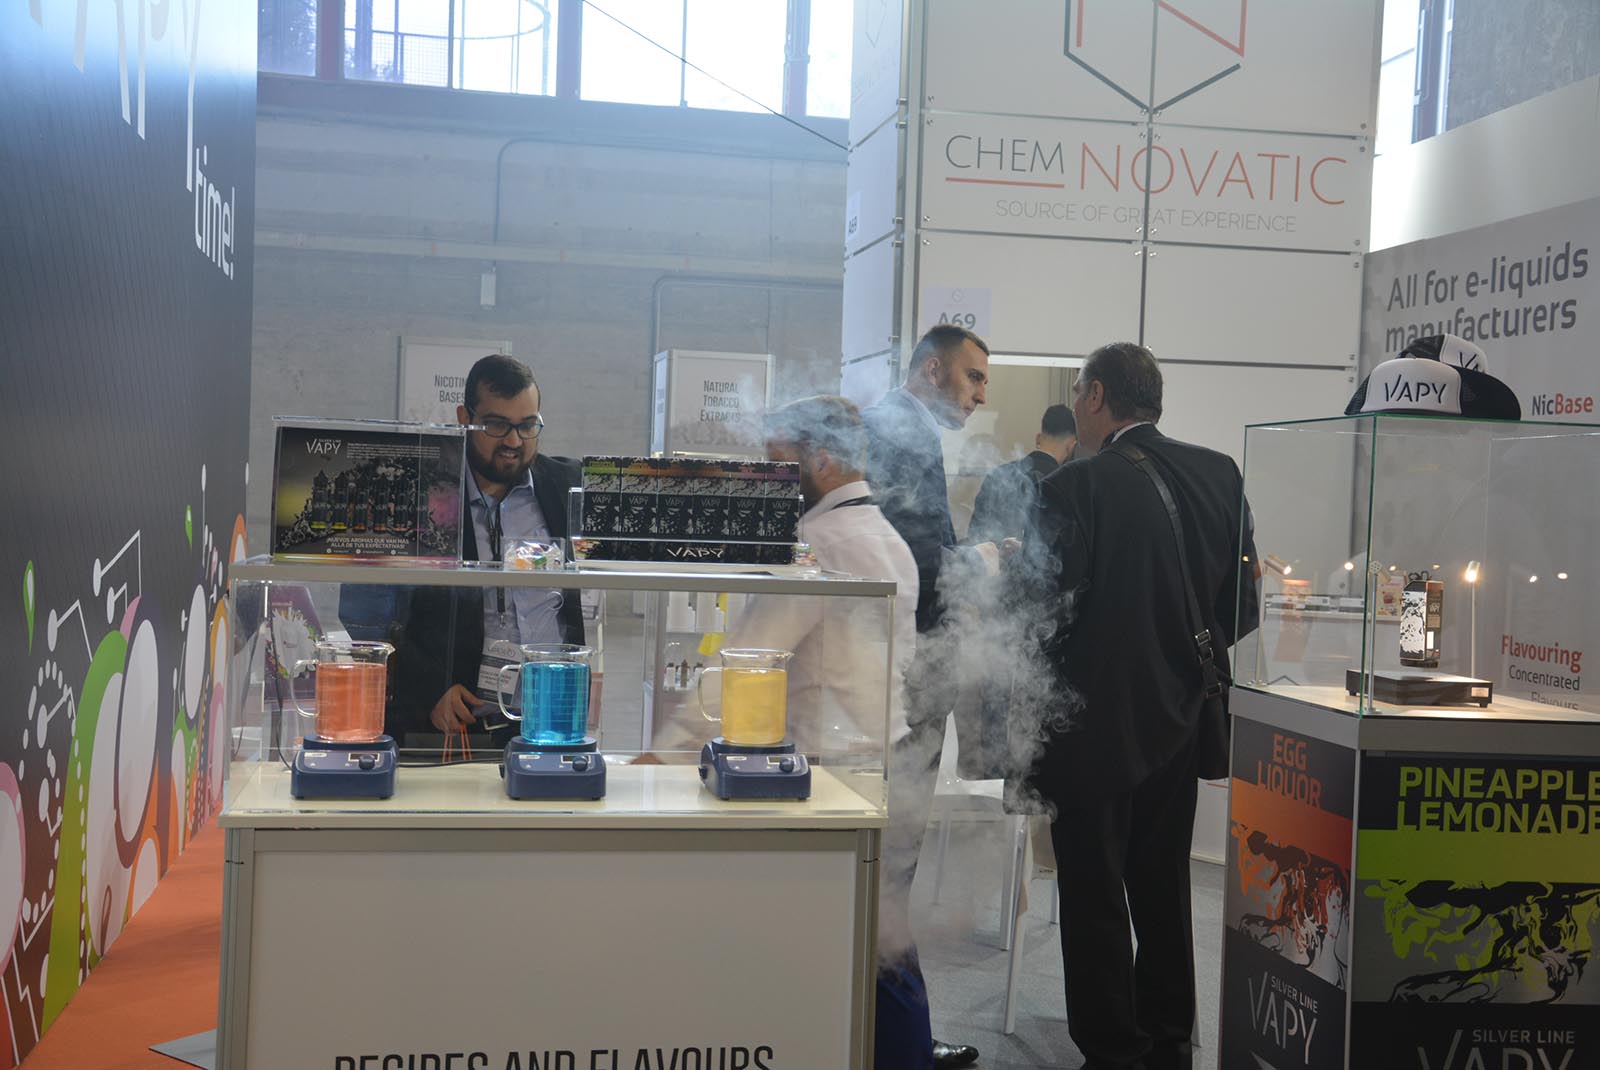 people at chemnovatic stand during vapeexpo 2018 spain